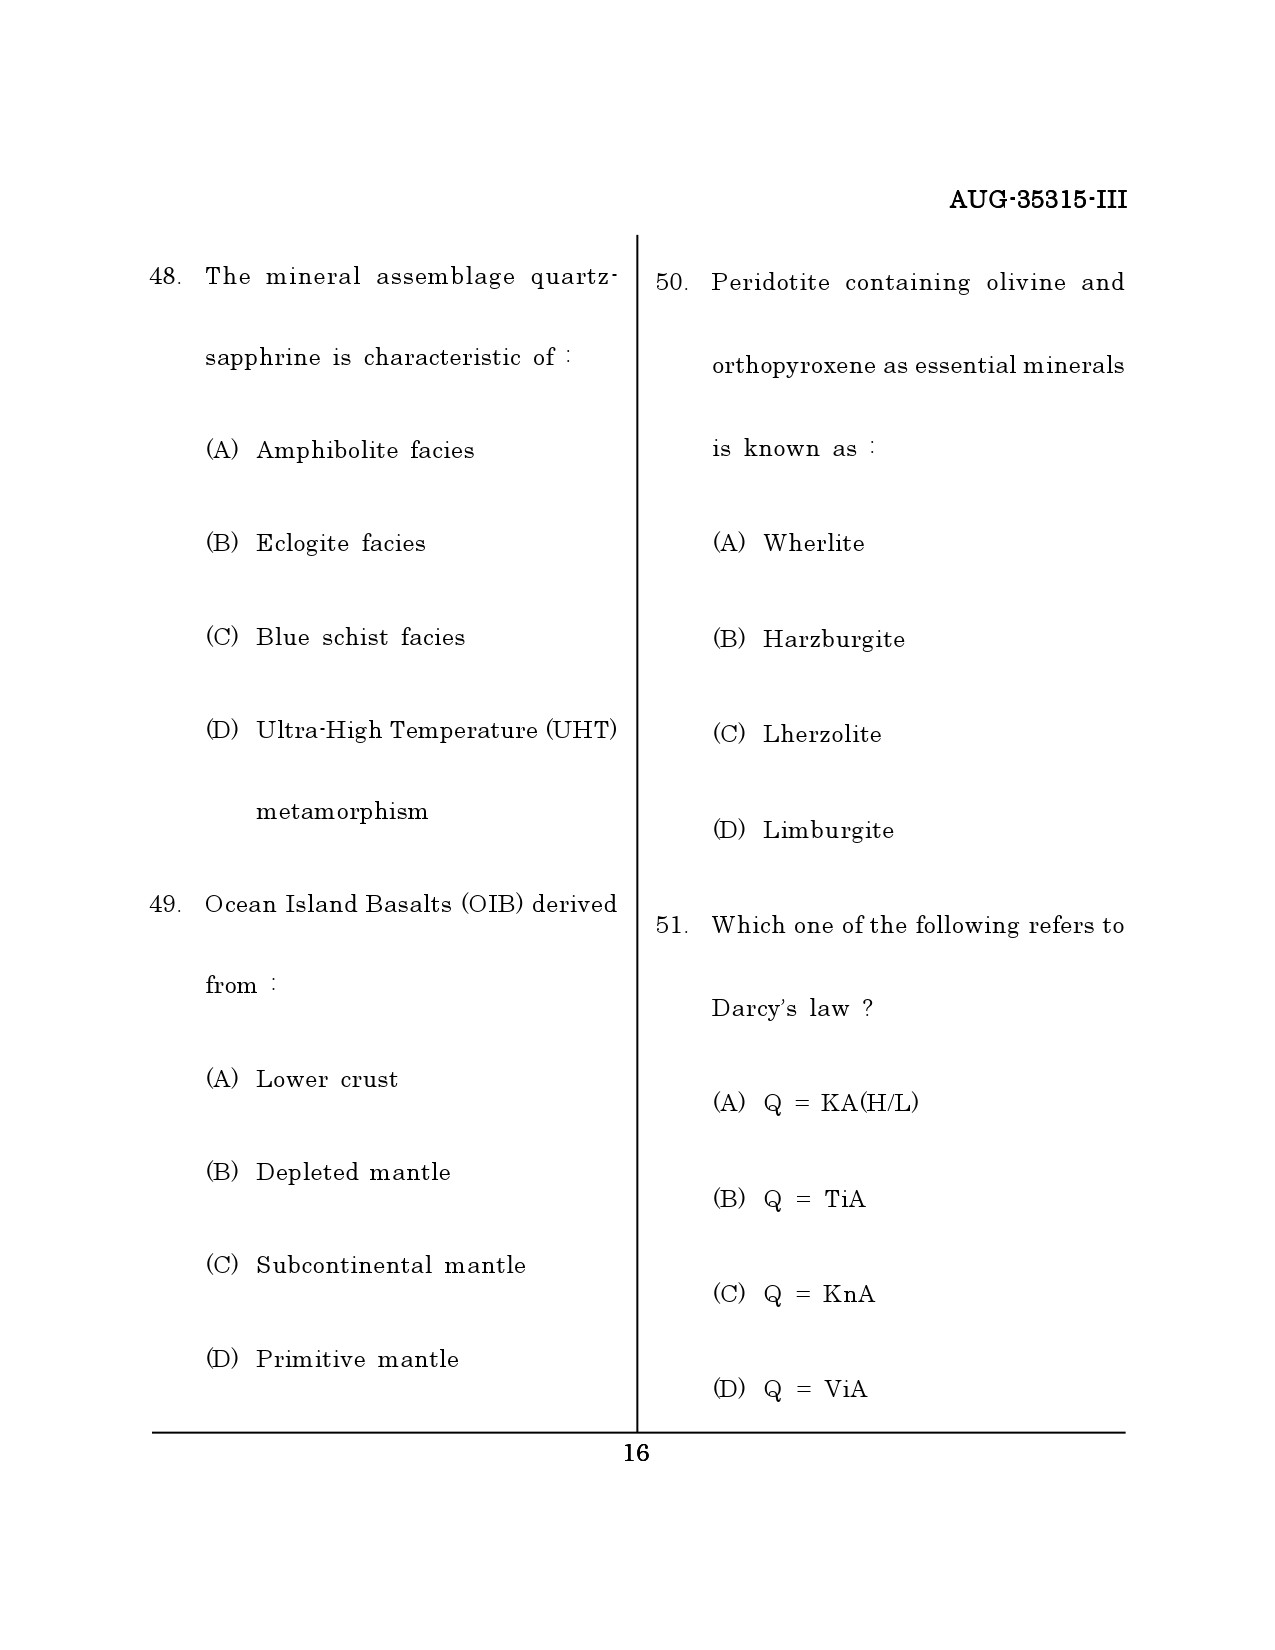 Maharashtra SET Earth Atmospheric Ocean Planetary Science Question Paper III August 2015 15